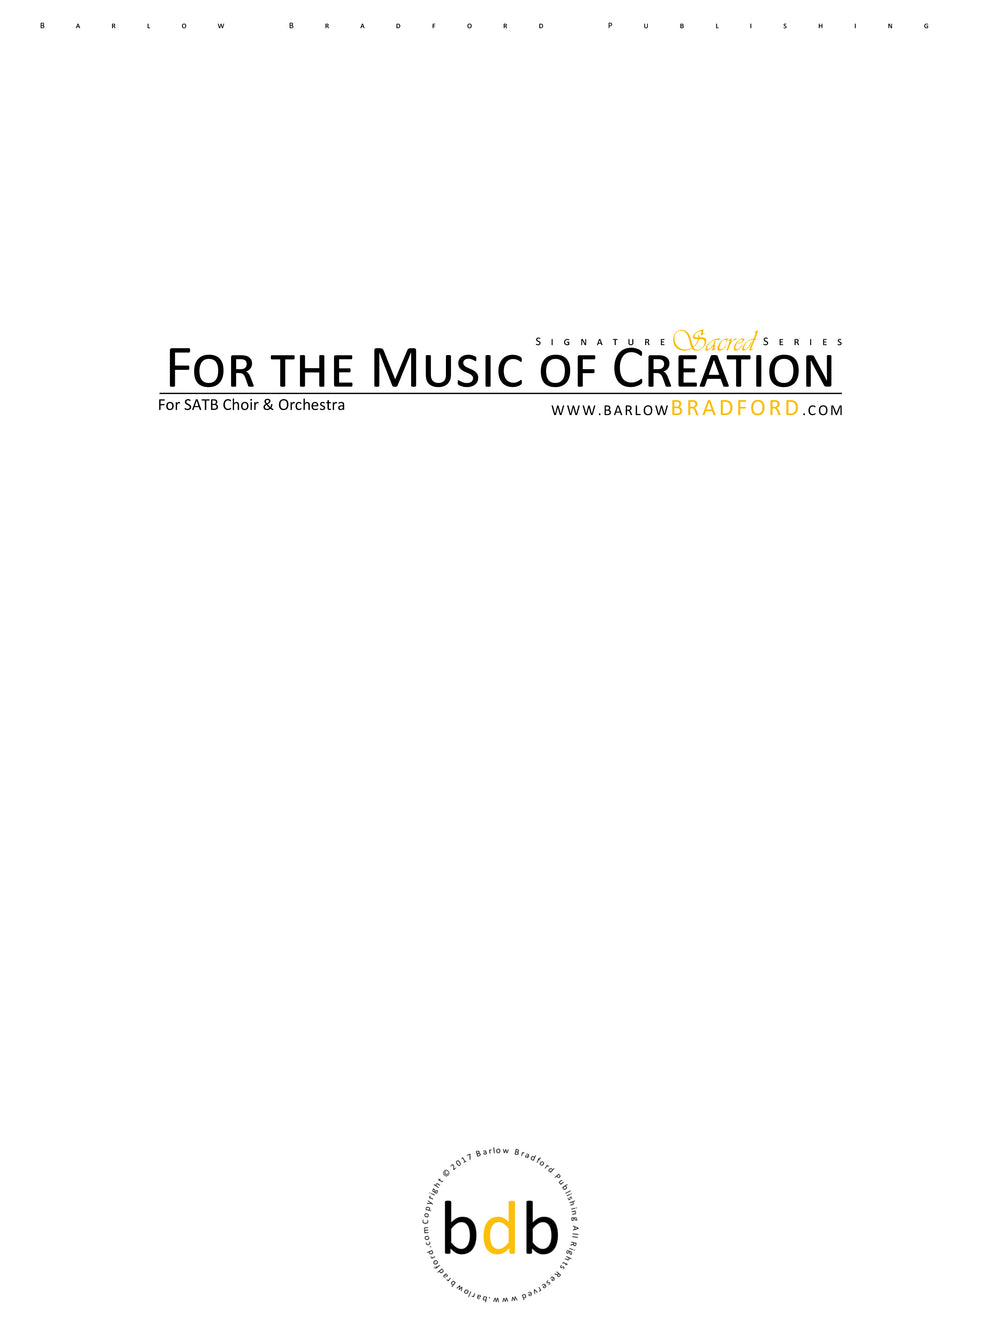 For the Music of Creation